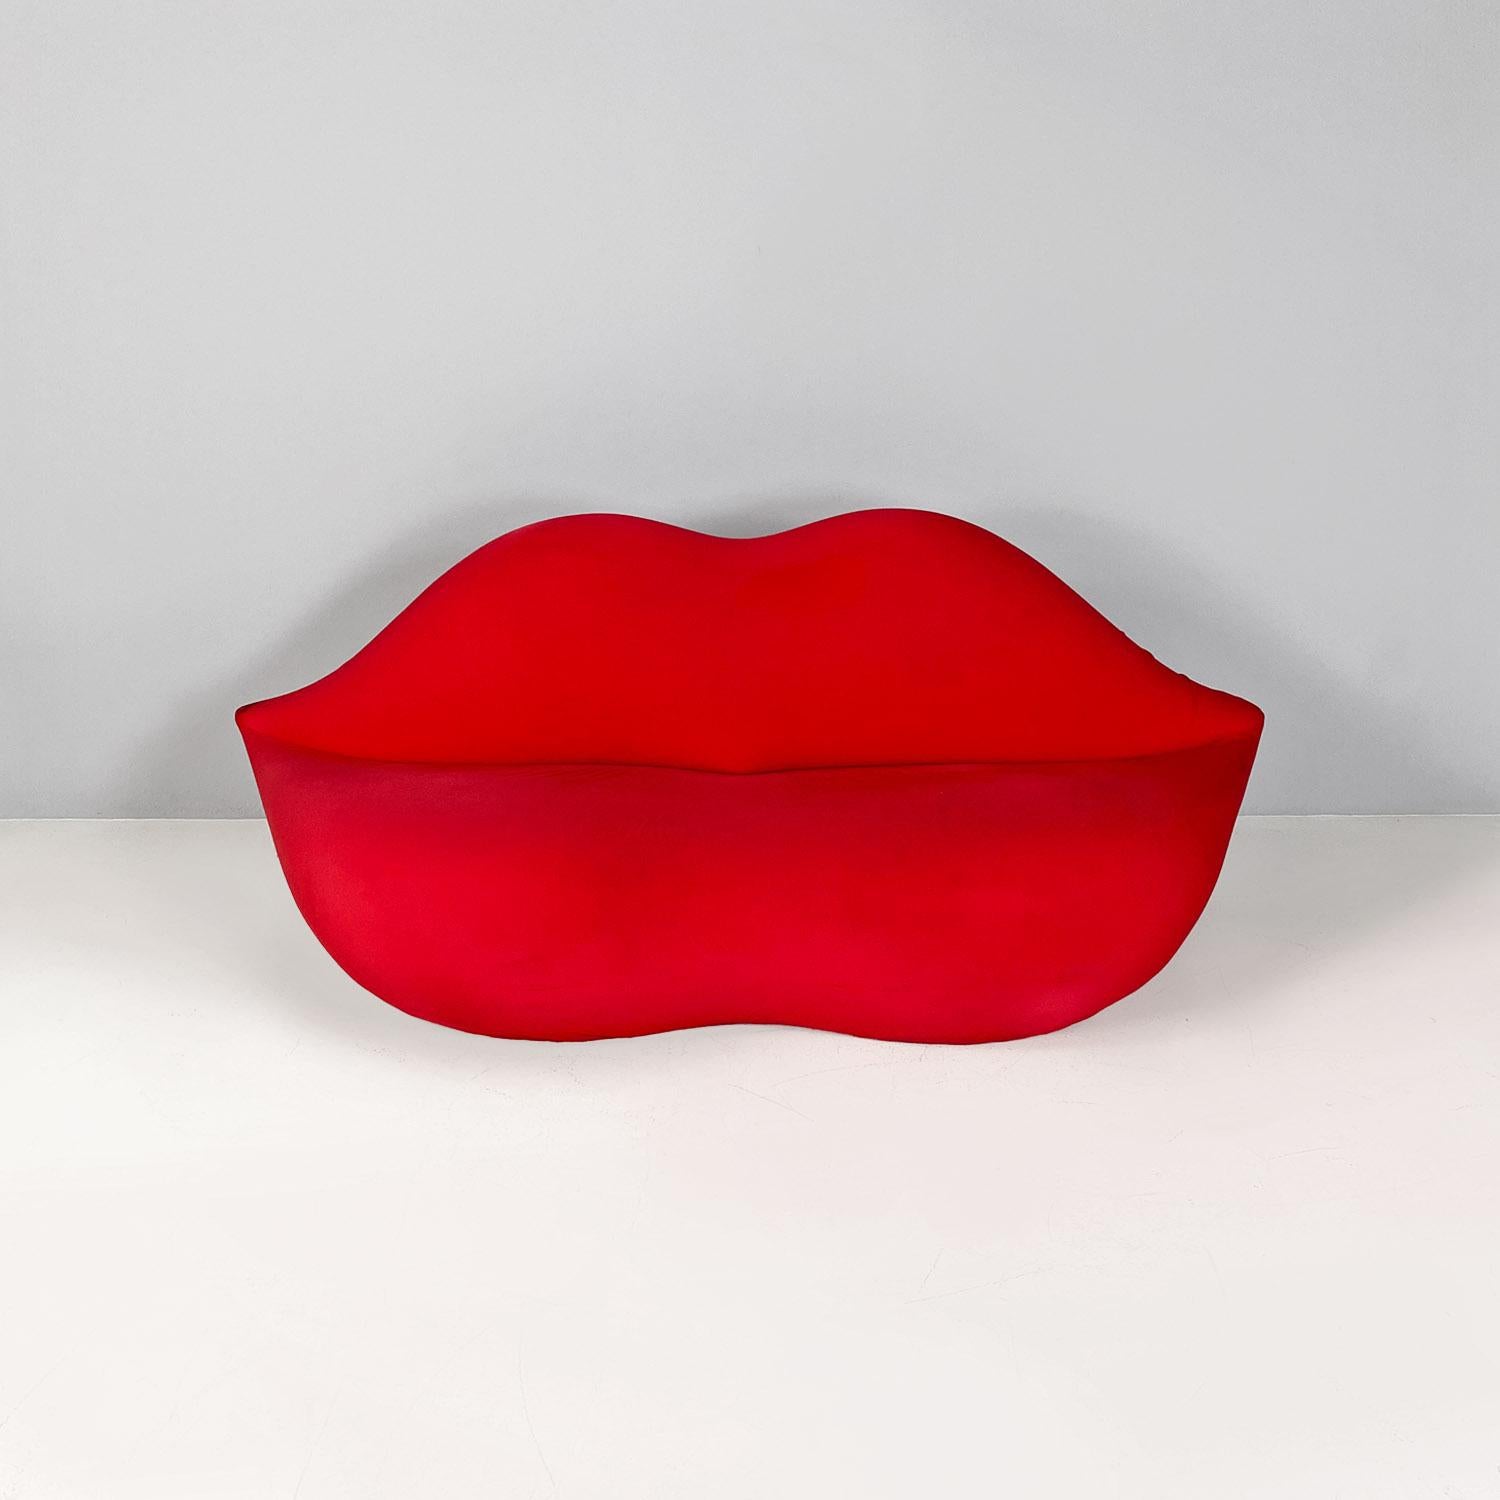 Italian modern red sofa Bocca by Studio 65 for Gufram, 1970s
Bocca model sofa, in fact it is in the shape of giant lips, padded with cold expanded polyurethane with differentiated load-bearing capacity and covered in red elasticated fabric. Totally